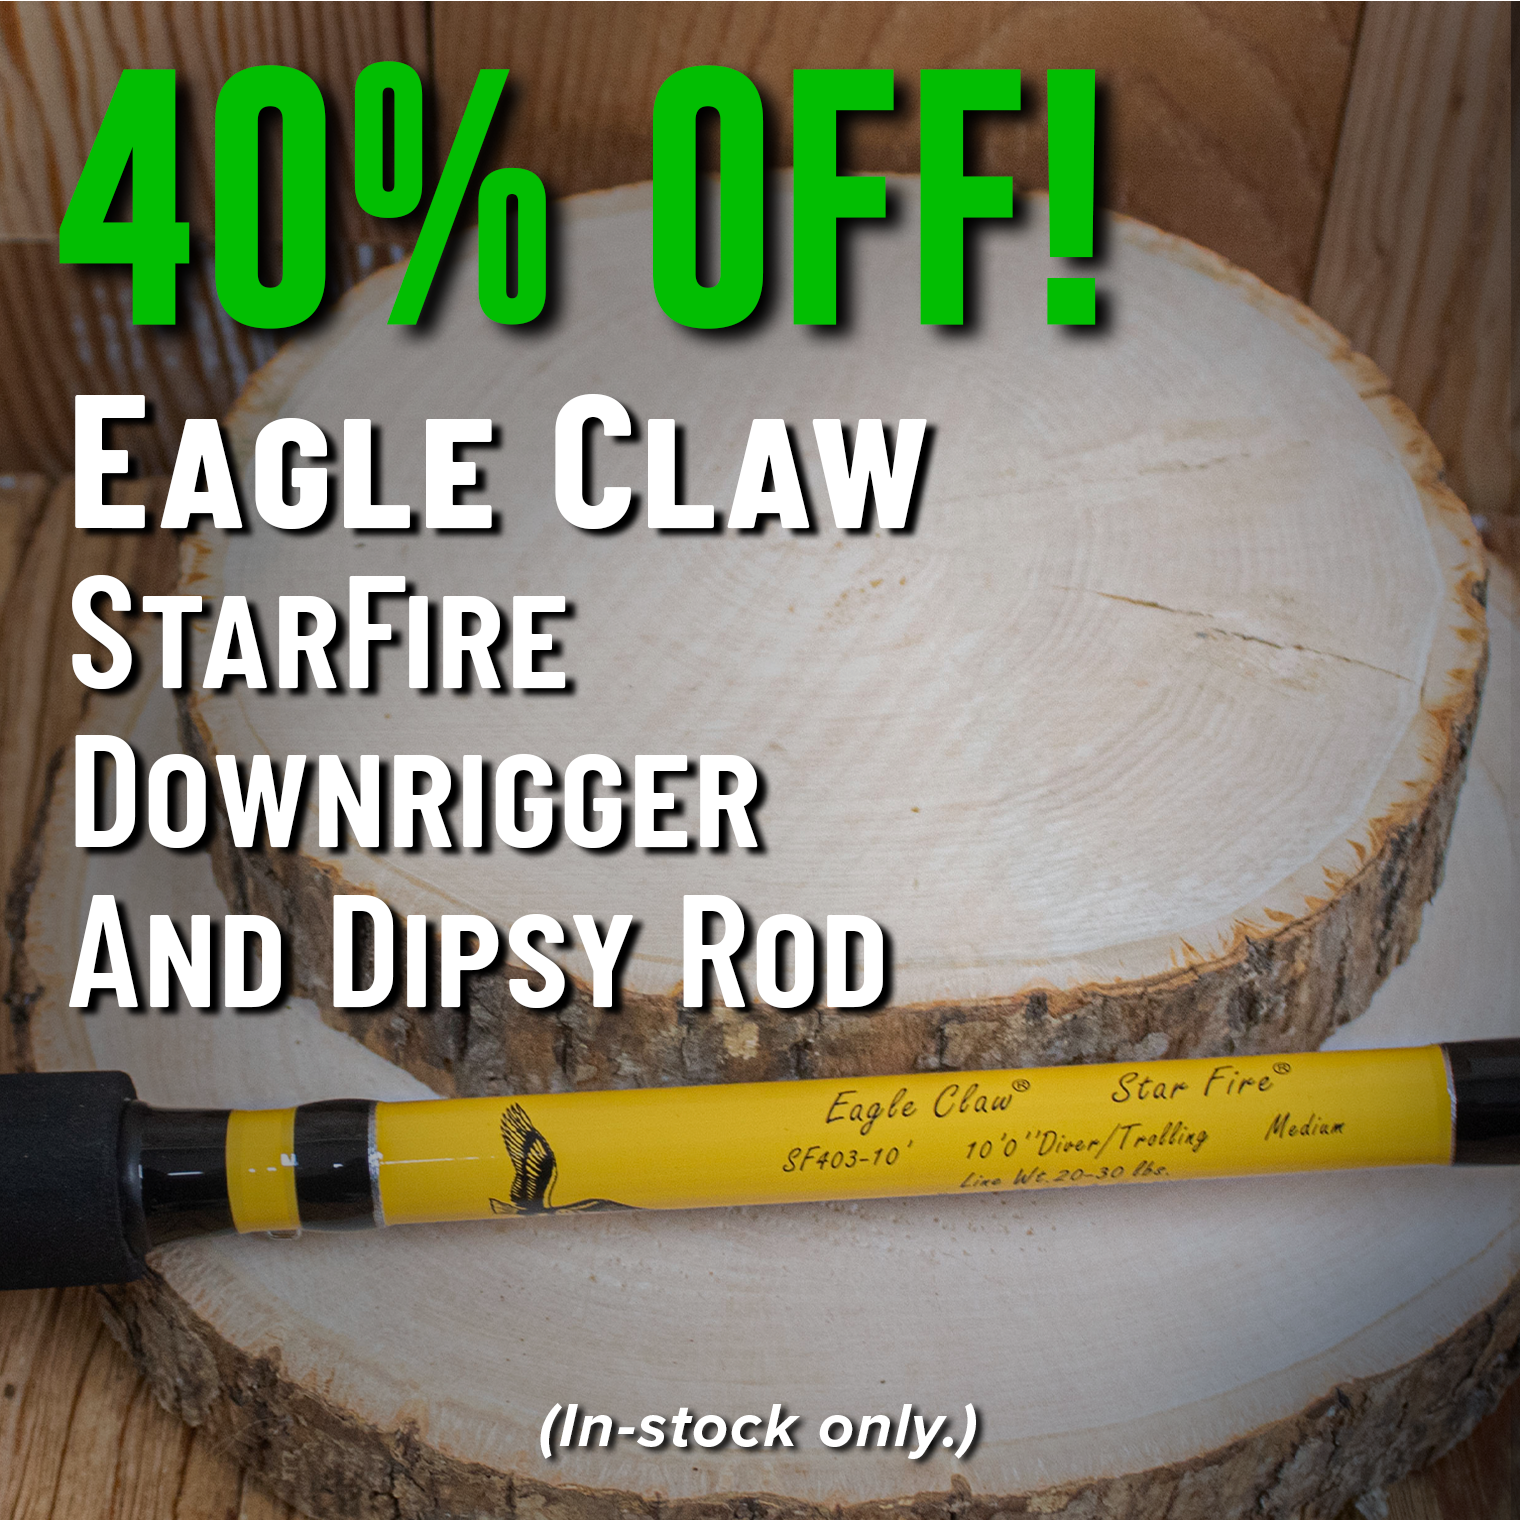 40% Off! Eagle Claw StarFire Downrigger and Dipsy Rod (In-stock only.)